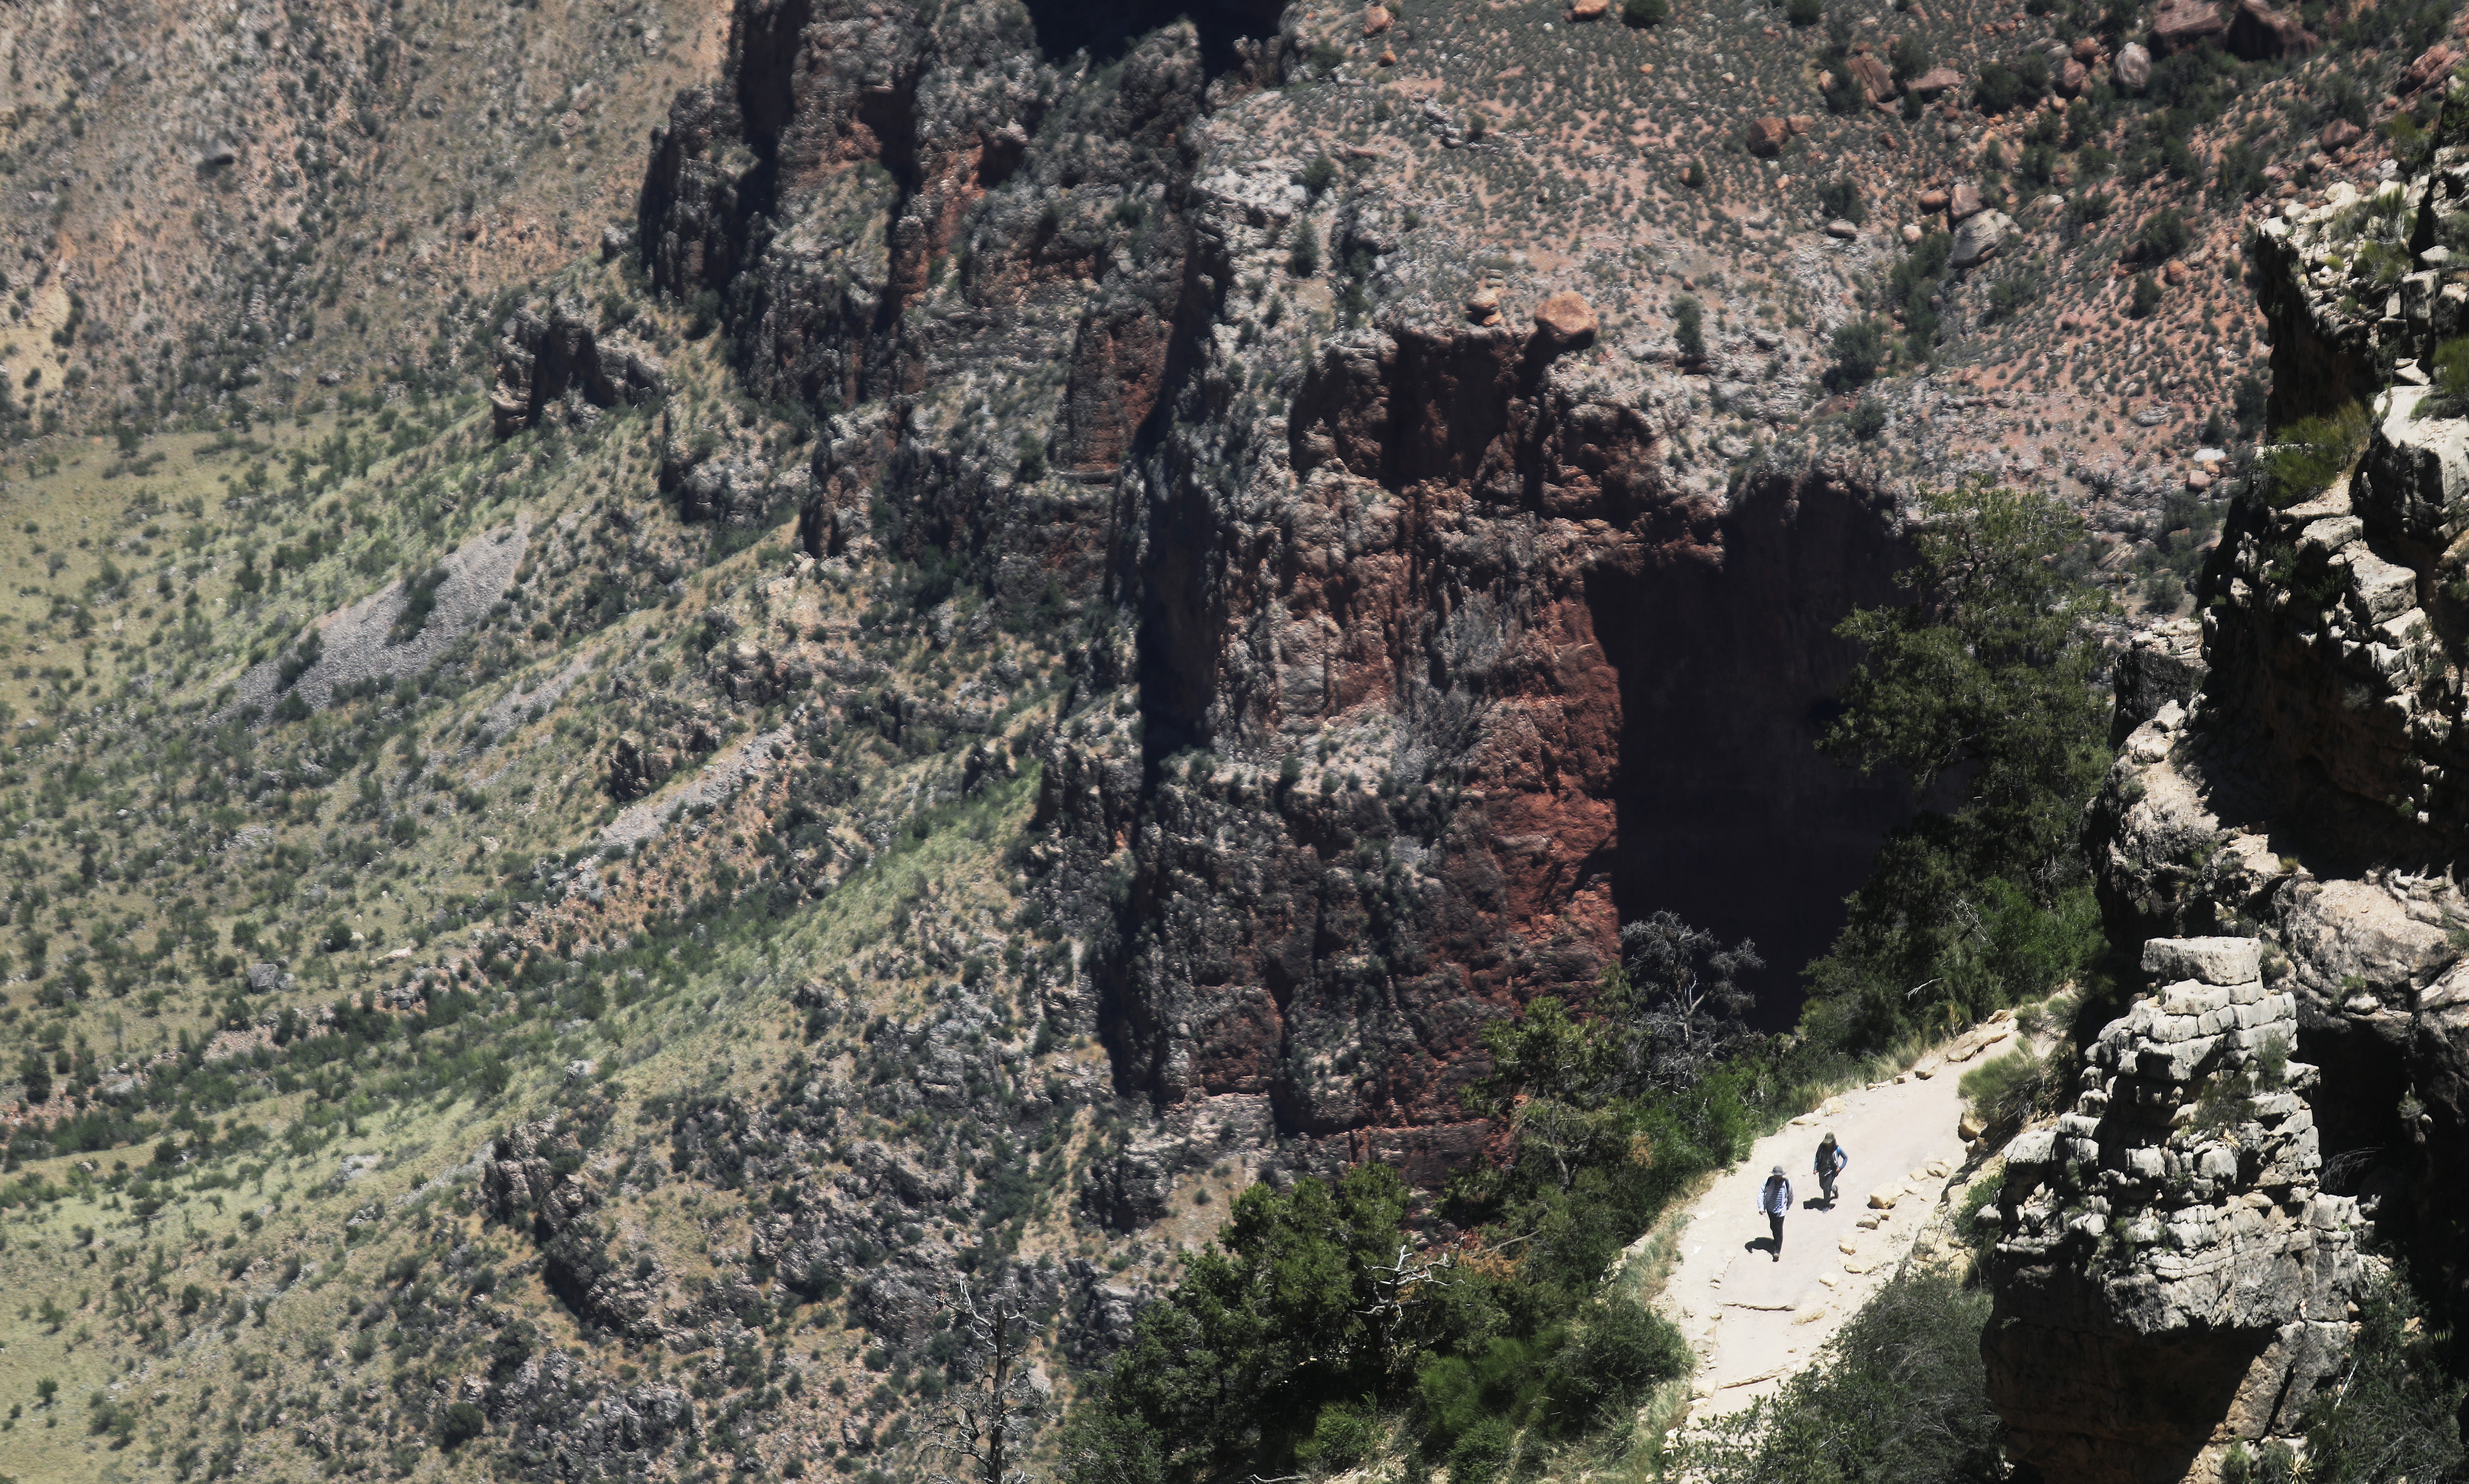 Visitors hike on Memorial Day in the South Rim of Grand Canyon National Park, which has partially reopened on weekends amid the coronavirus (COVID-19) pandemic, on May 25, 2020 in Grand Canyon National Park, Arizona